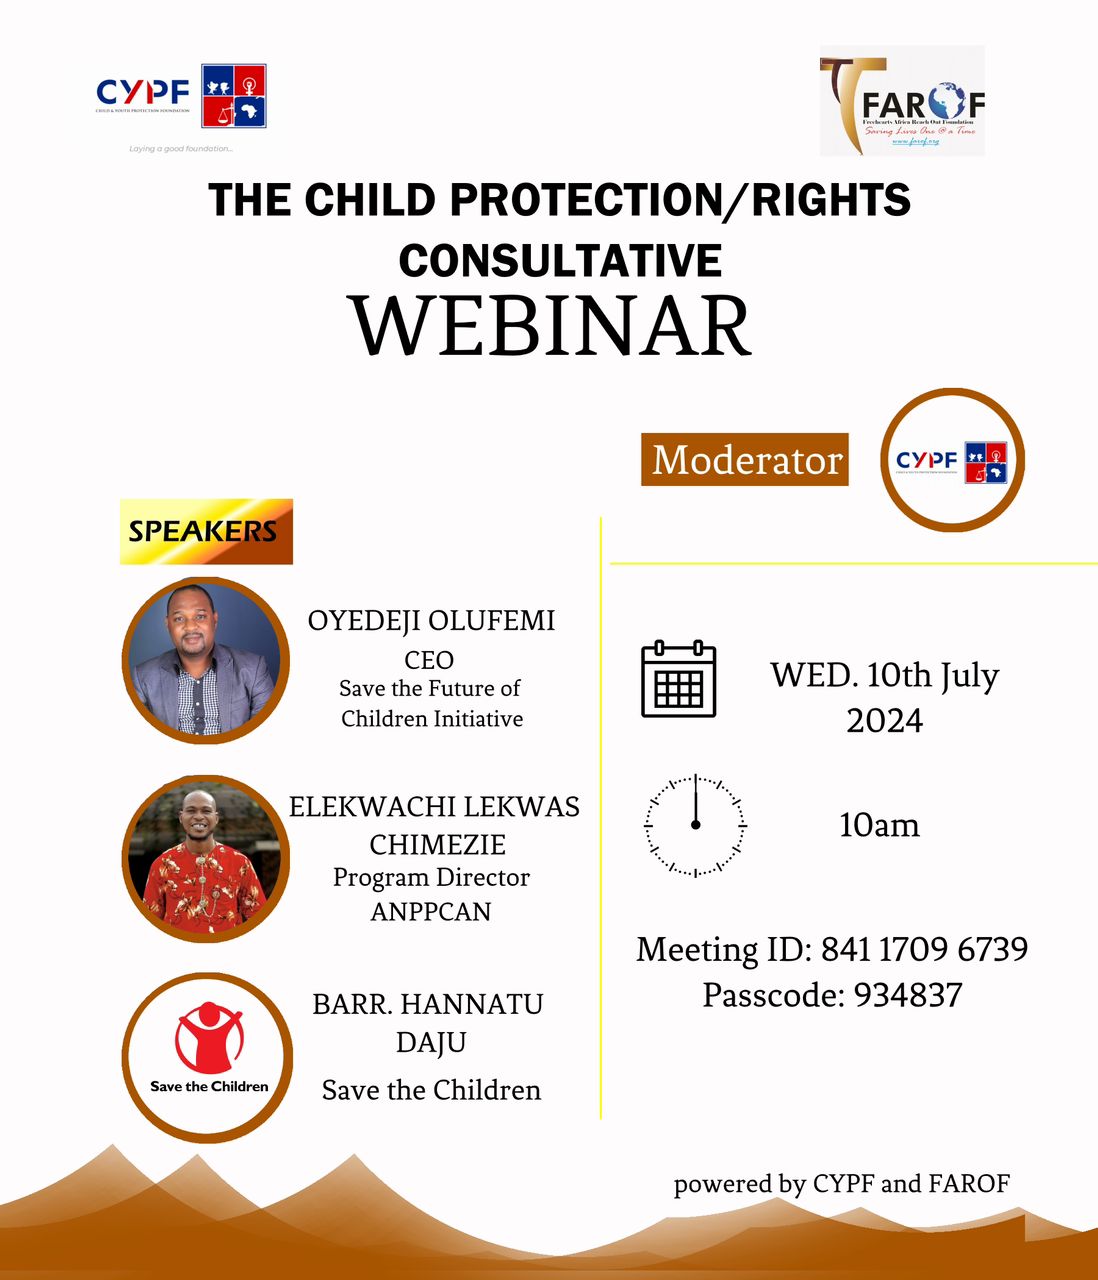 THE CHILD PROTECTION/ RIGHTS CONSULTATIVE  MEETING WITH CSO & GOVERNMENT OFFICIALS